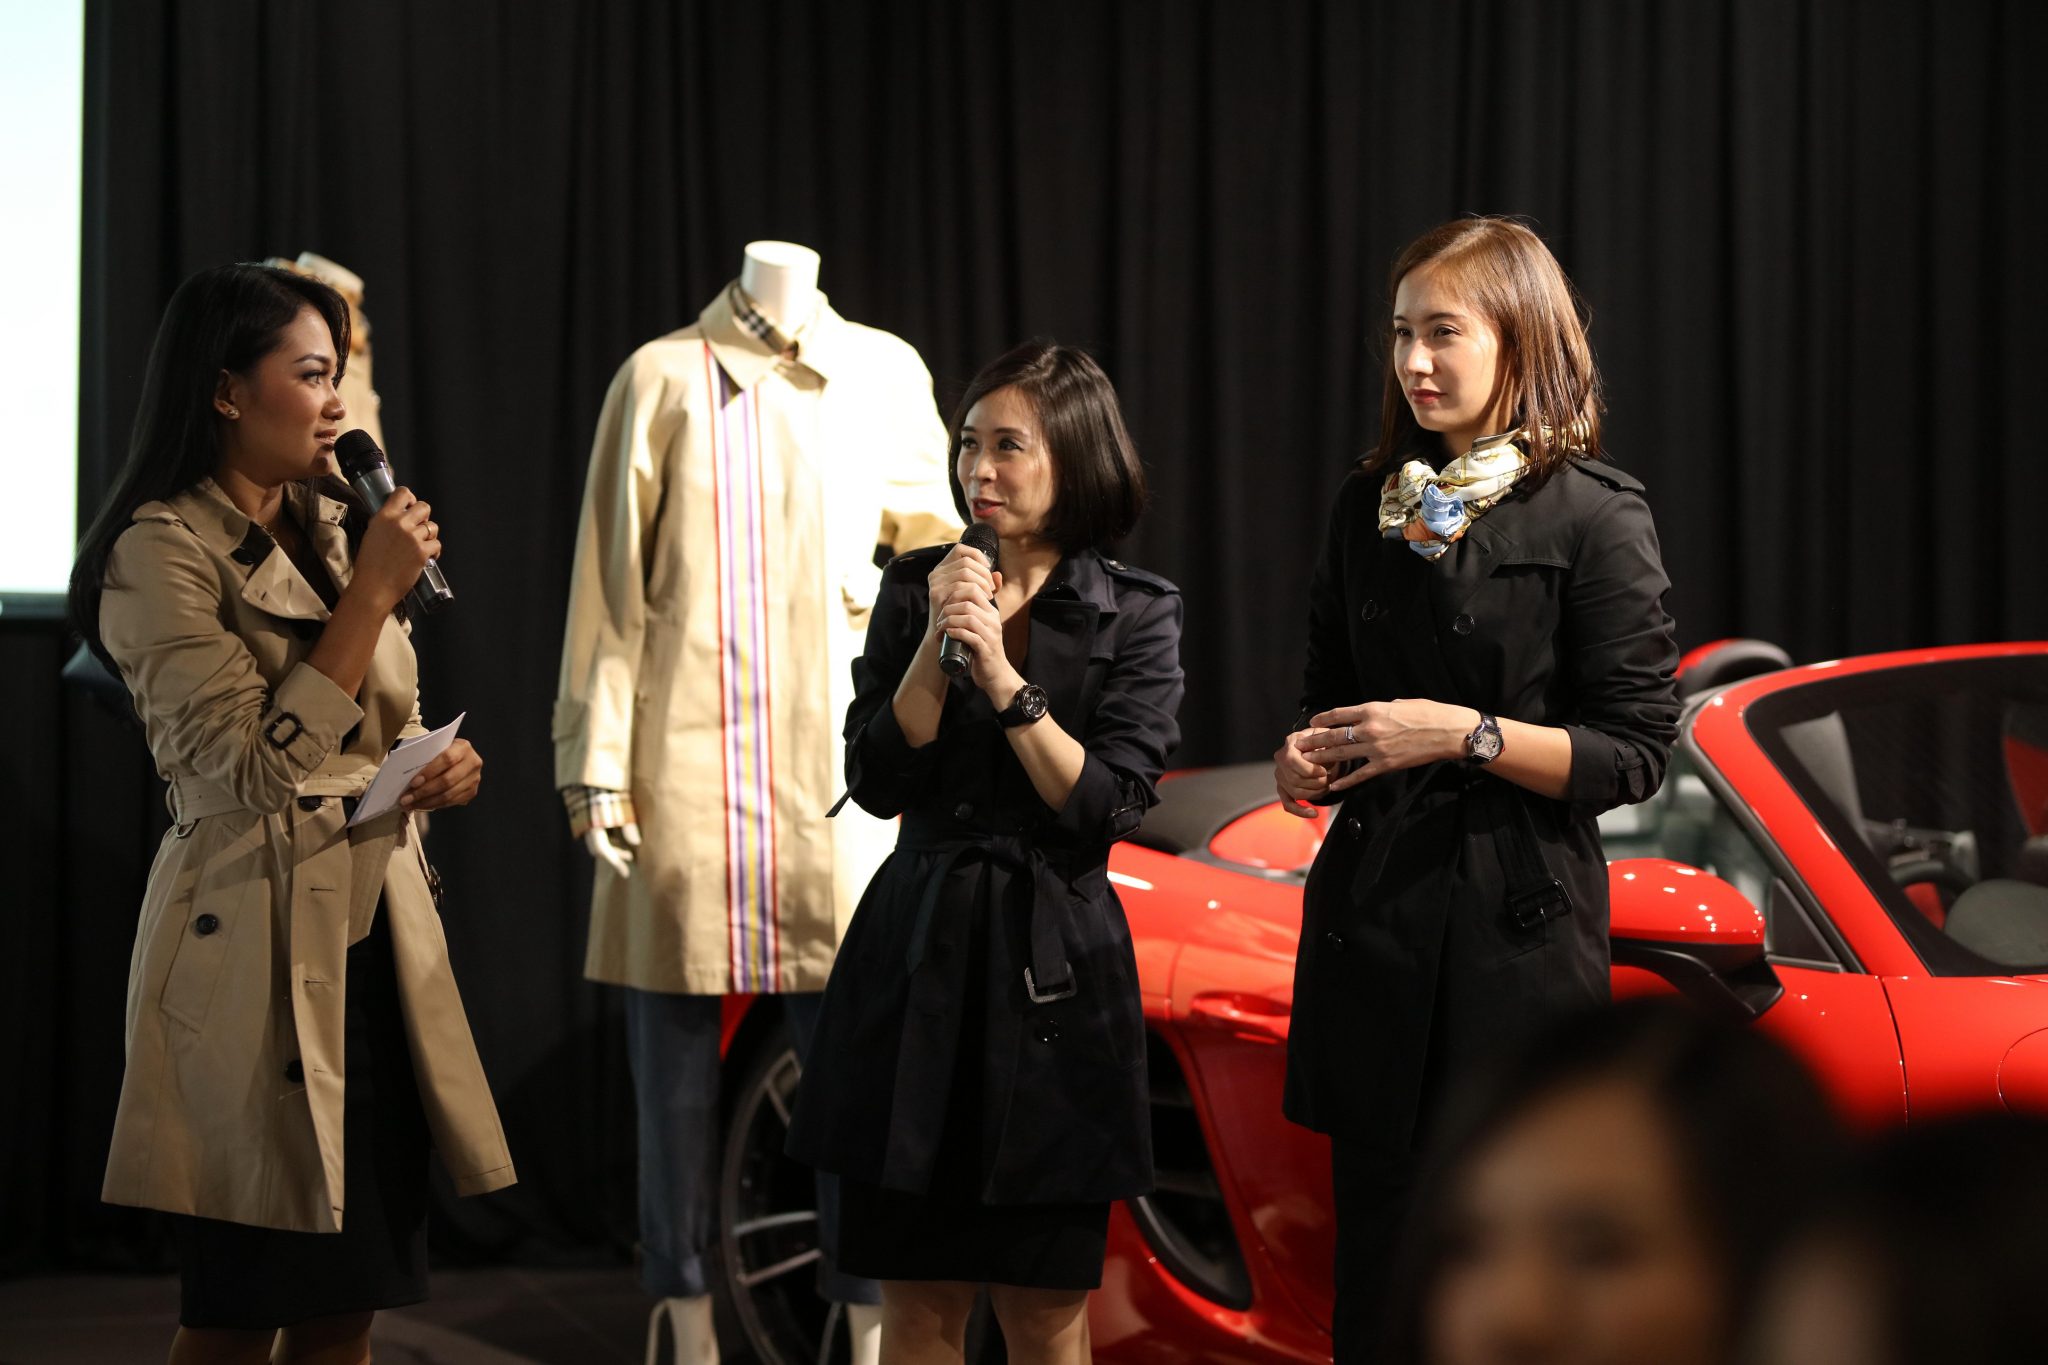 Ms Mieske Halim (centre), Burberry’s senior private client consultant, shared creative tips on how everyone can elevate their day-to-day wardrobe and attire